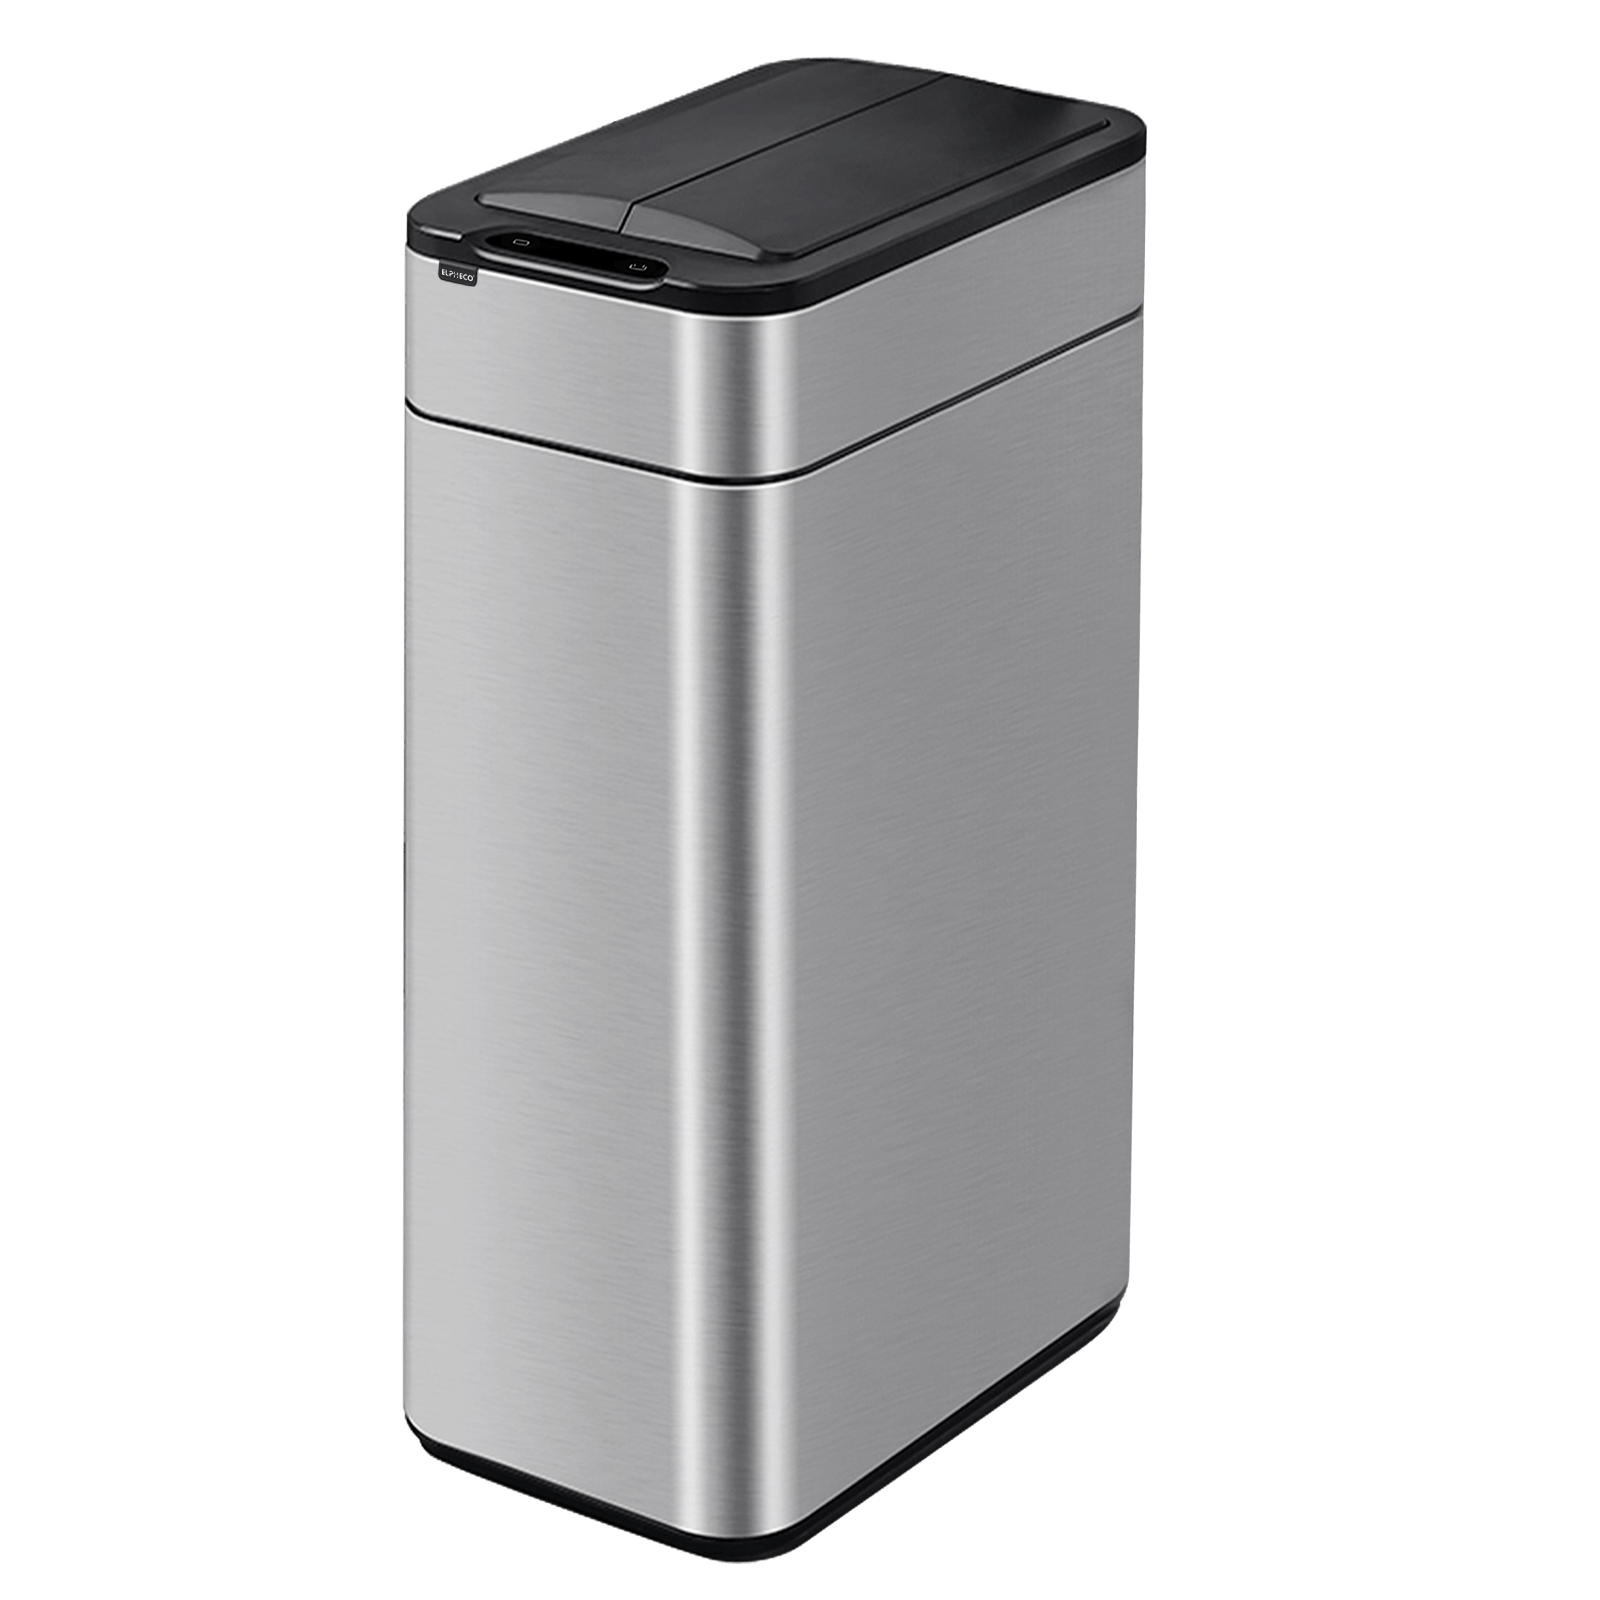 H+LUX Small Trash Can with Lid for Bathroom,Bedroom,Office,Mini Garbage can  with Foot Pedal for Small Space, Anti-Fingerprint Brushed Stainless Steel